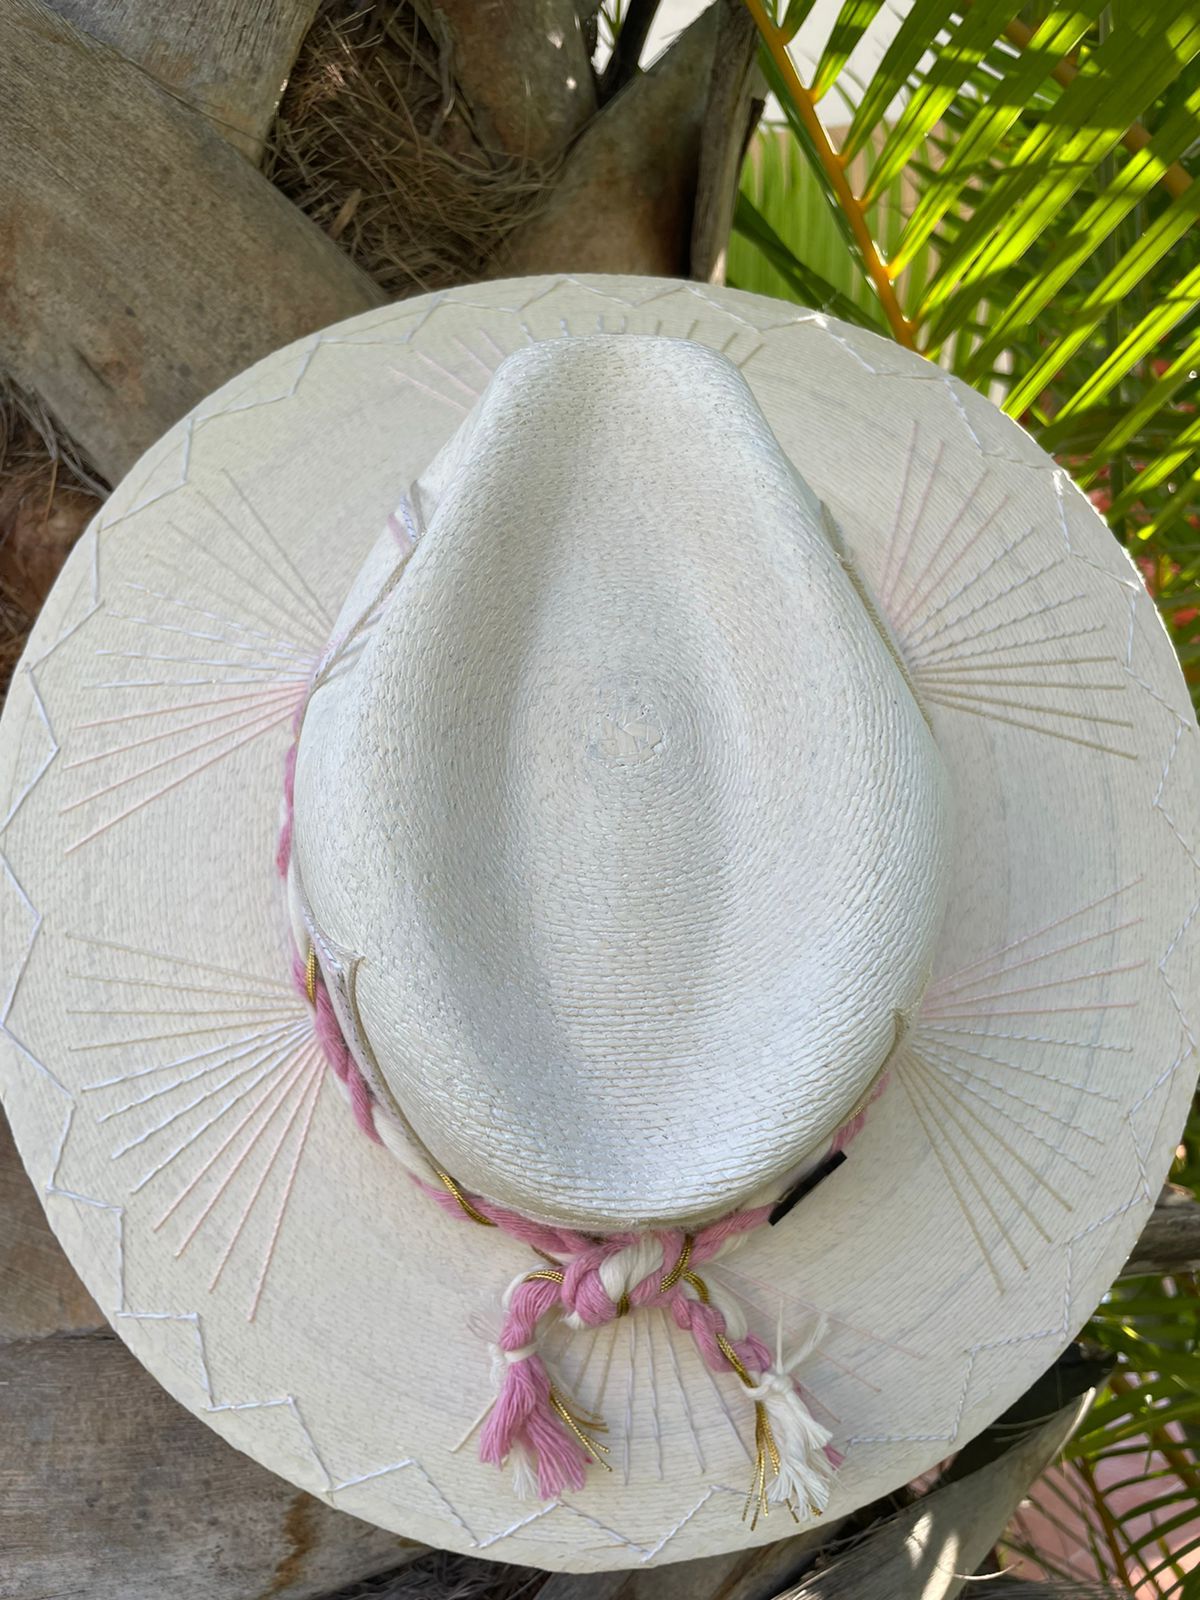 Exclusive Pretty in Pink Hat by Corazon Playero - Preorder